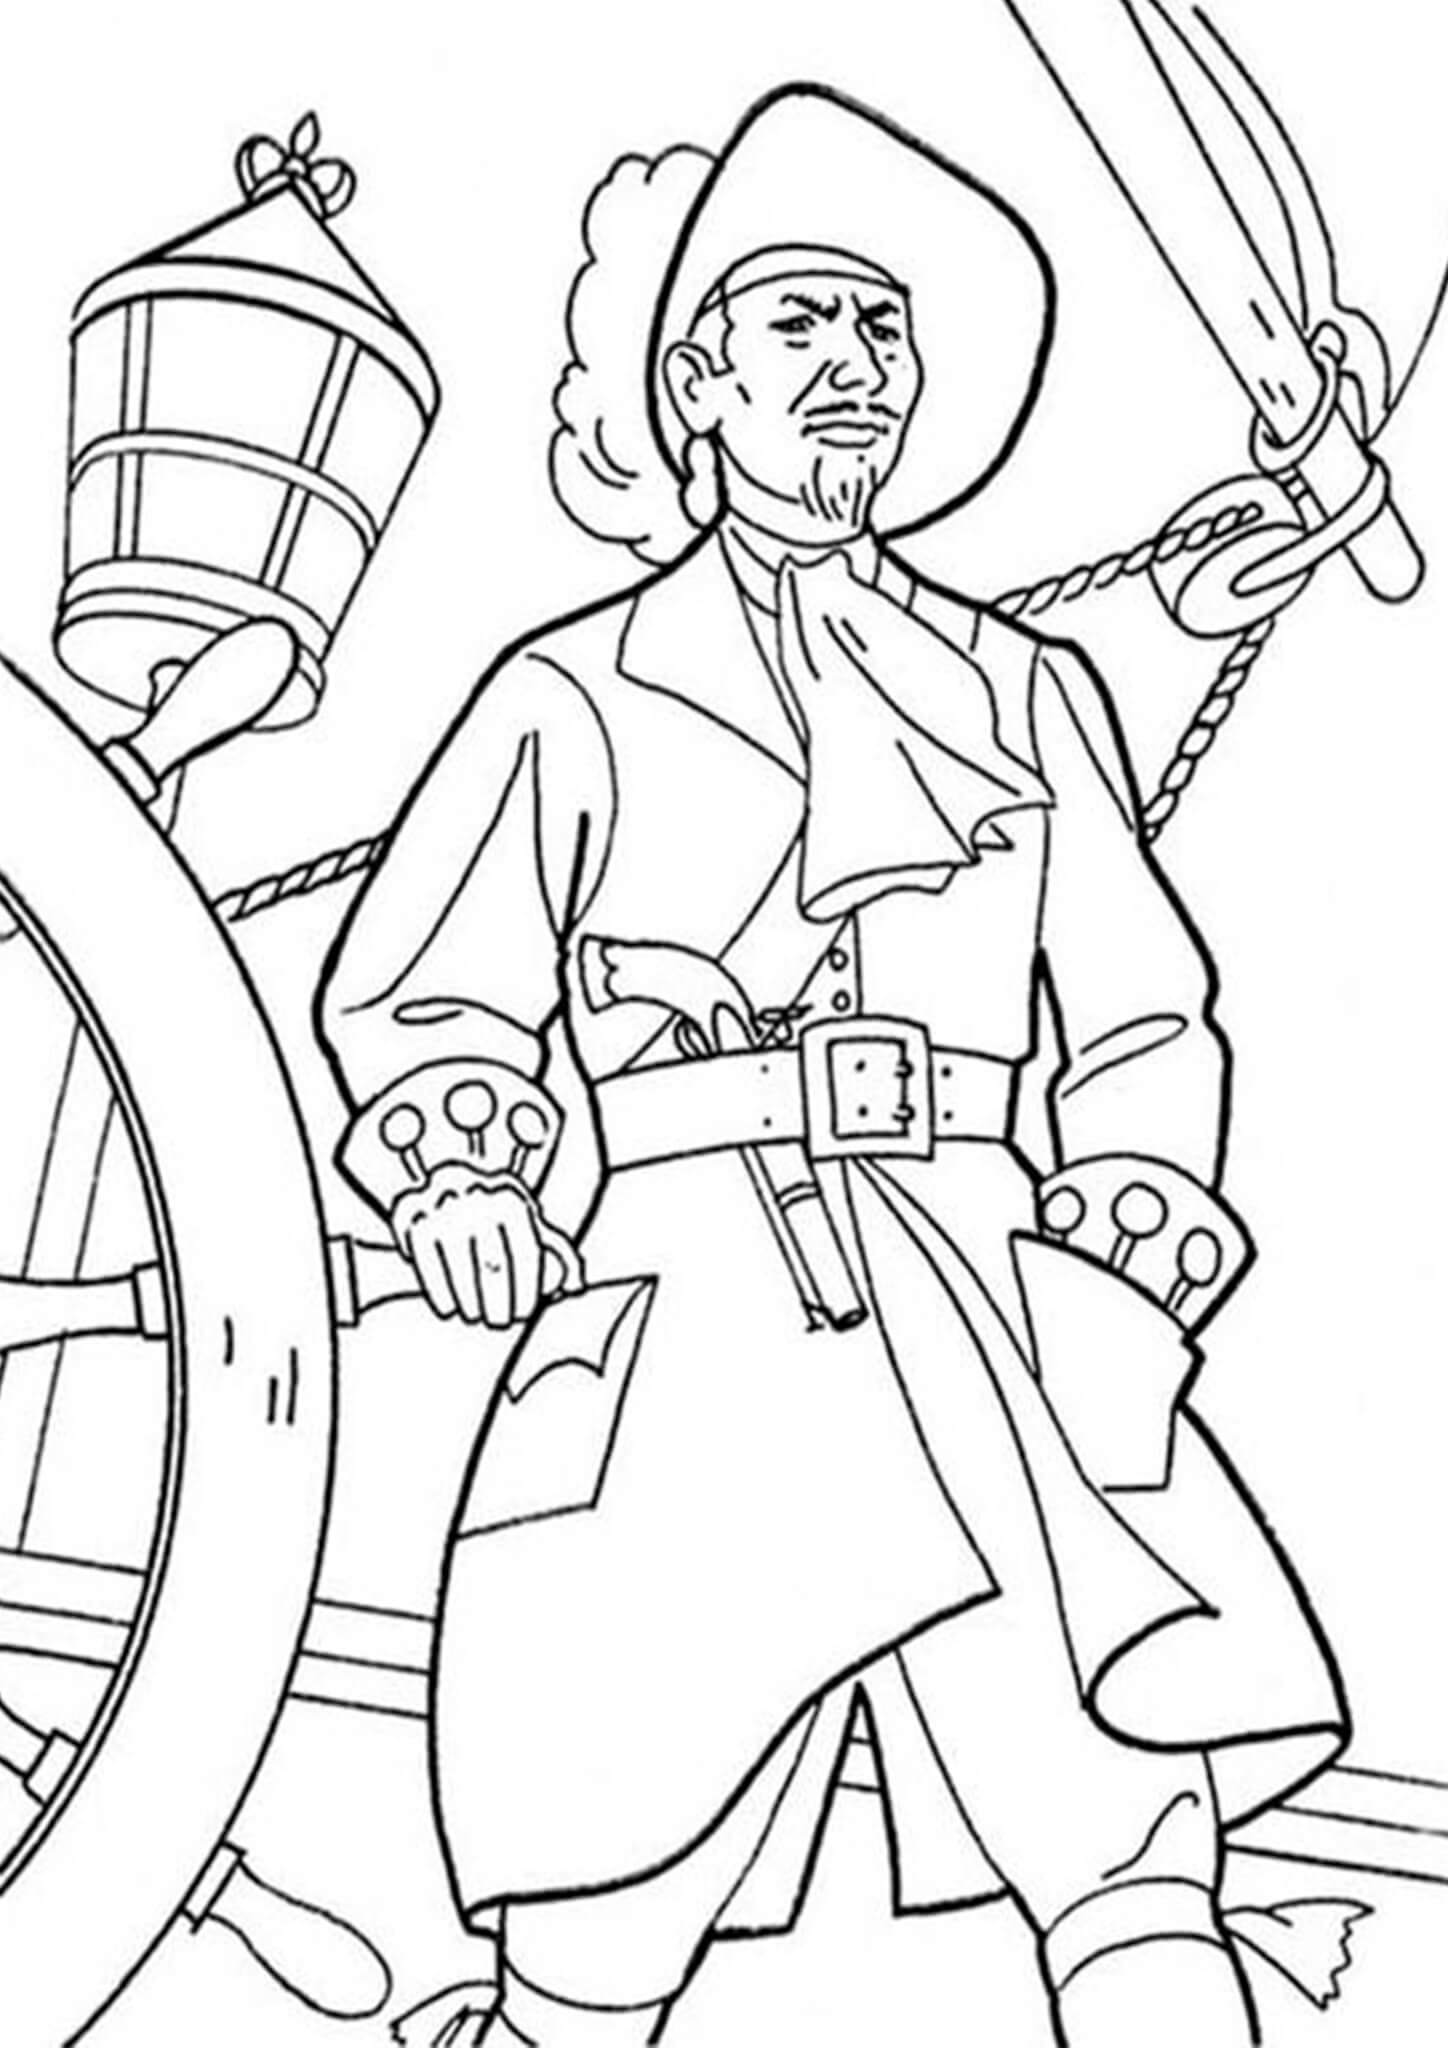 Free & Easy To Print Pirate Coloring Pages - Tulamama